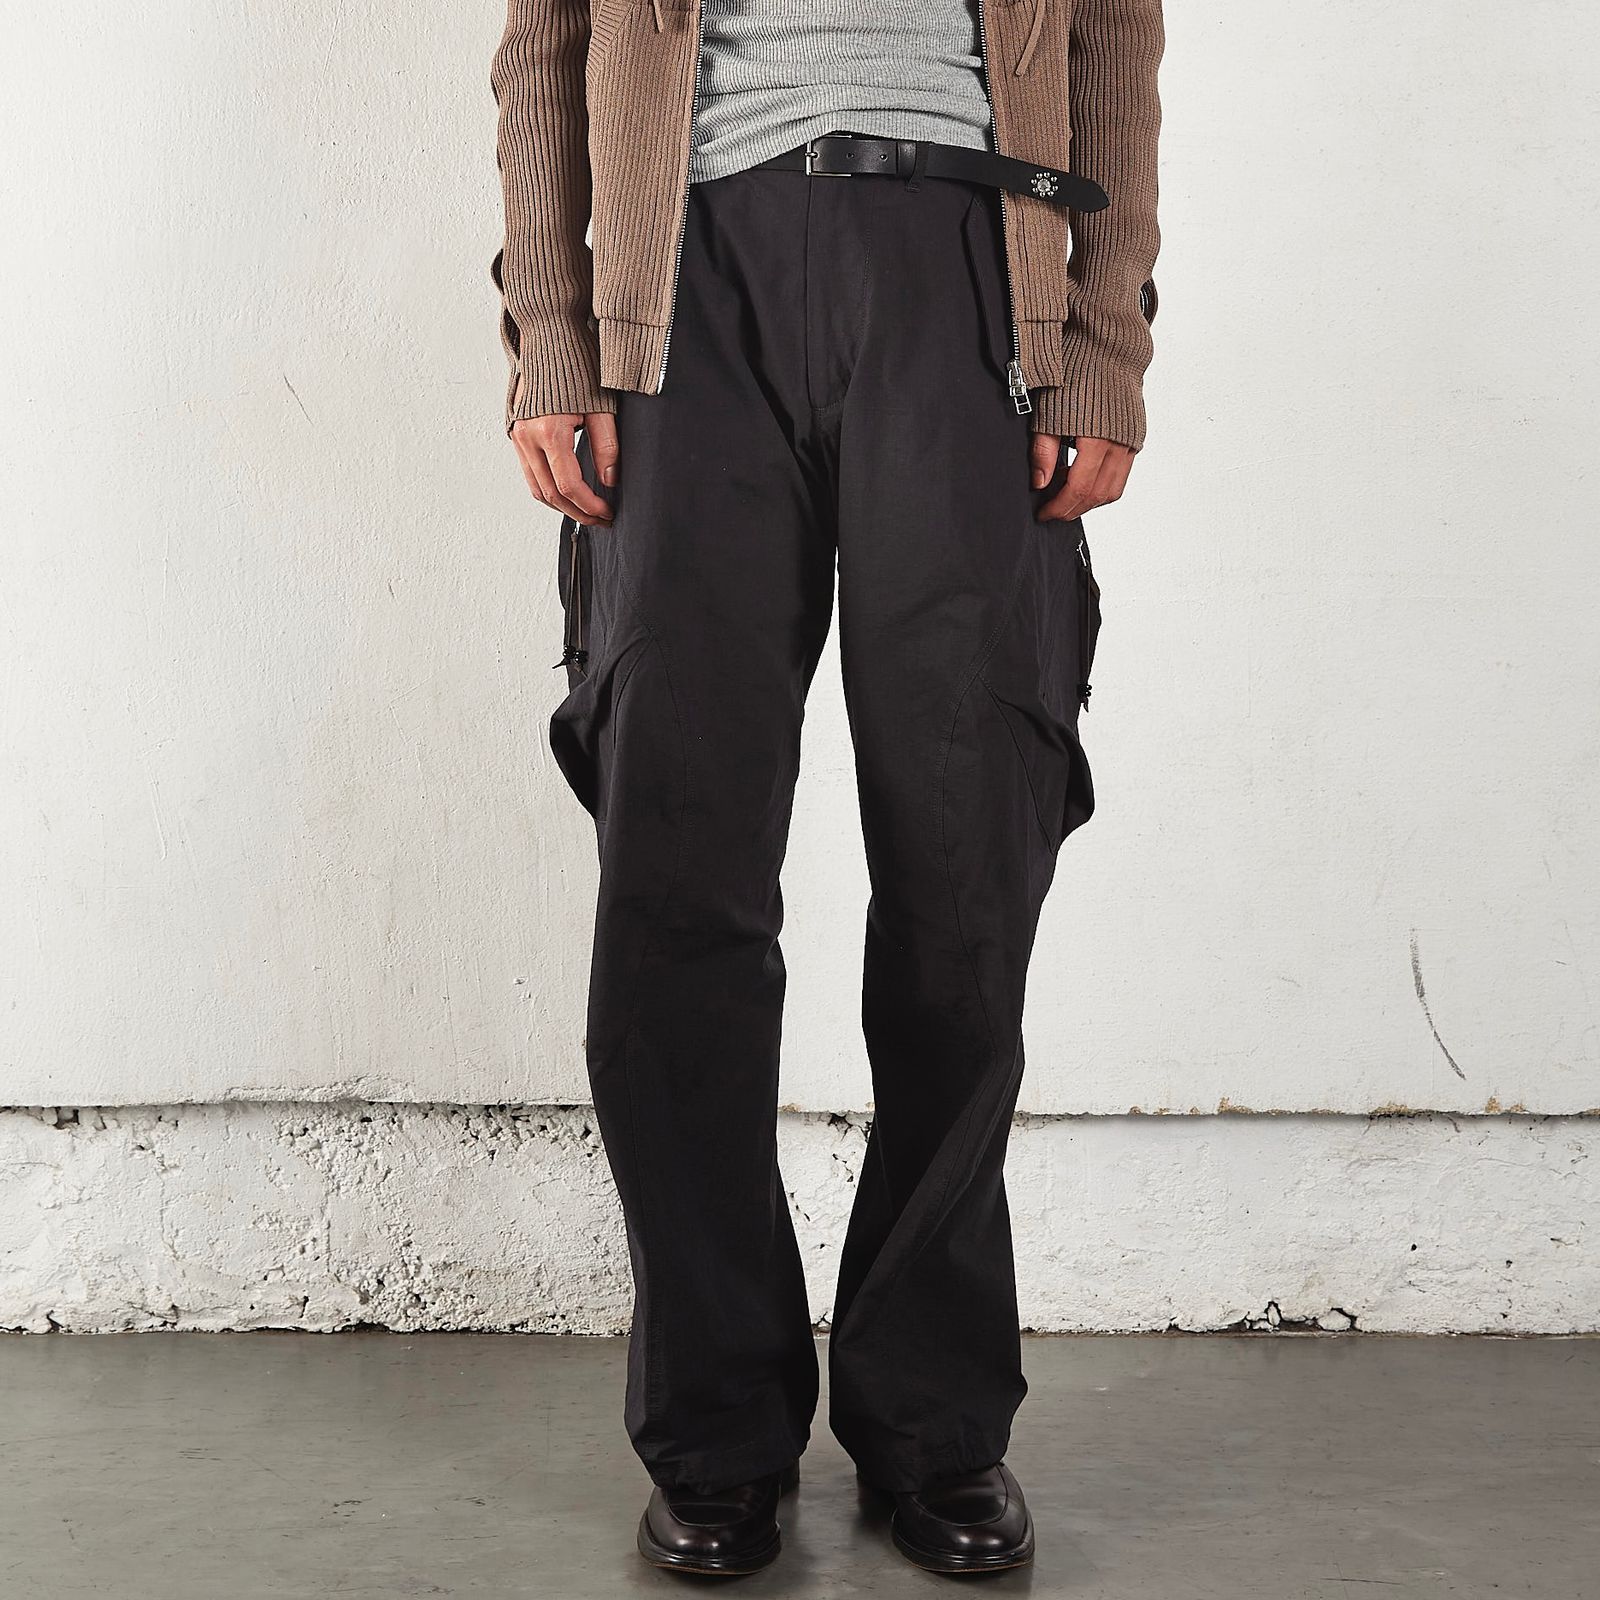 NVRFRGT - 【残りわずか】3D Twisted Cargo Pants | ACRMTSM ONLINE STORE